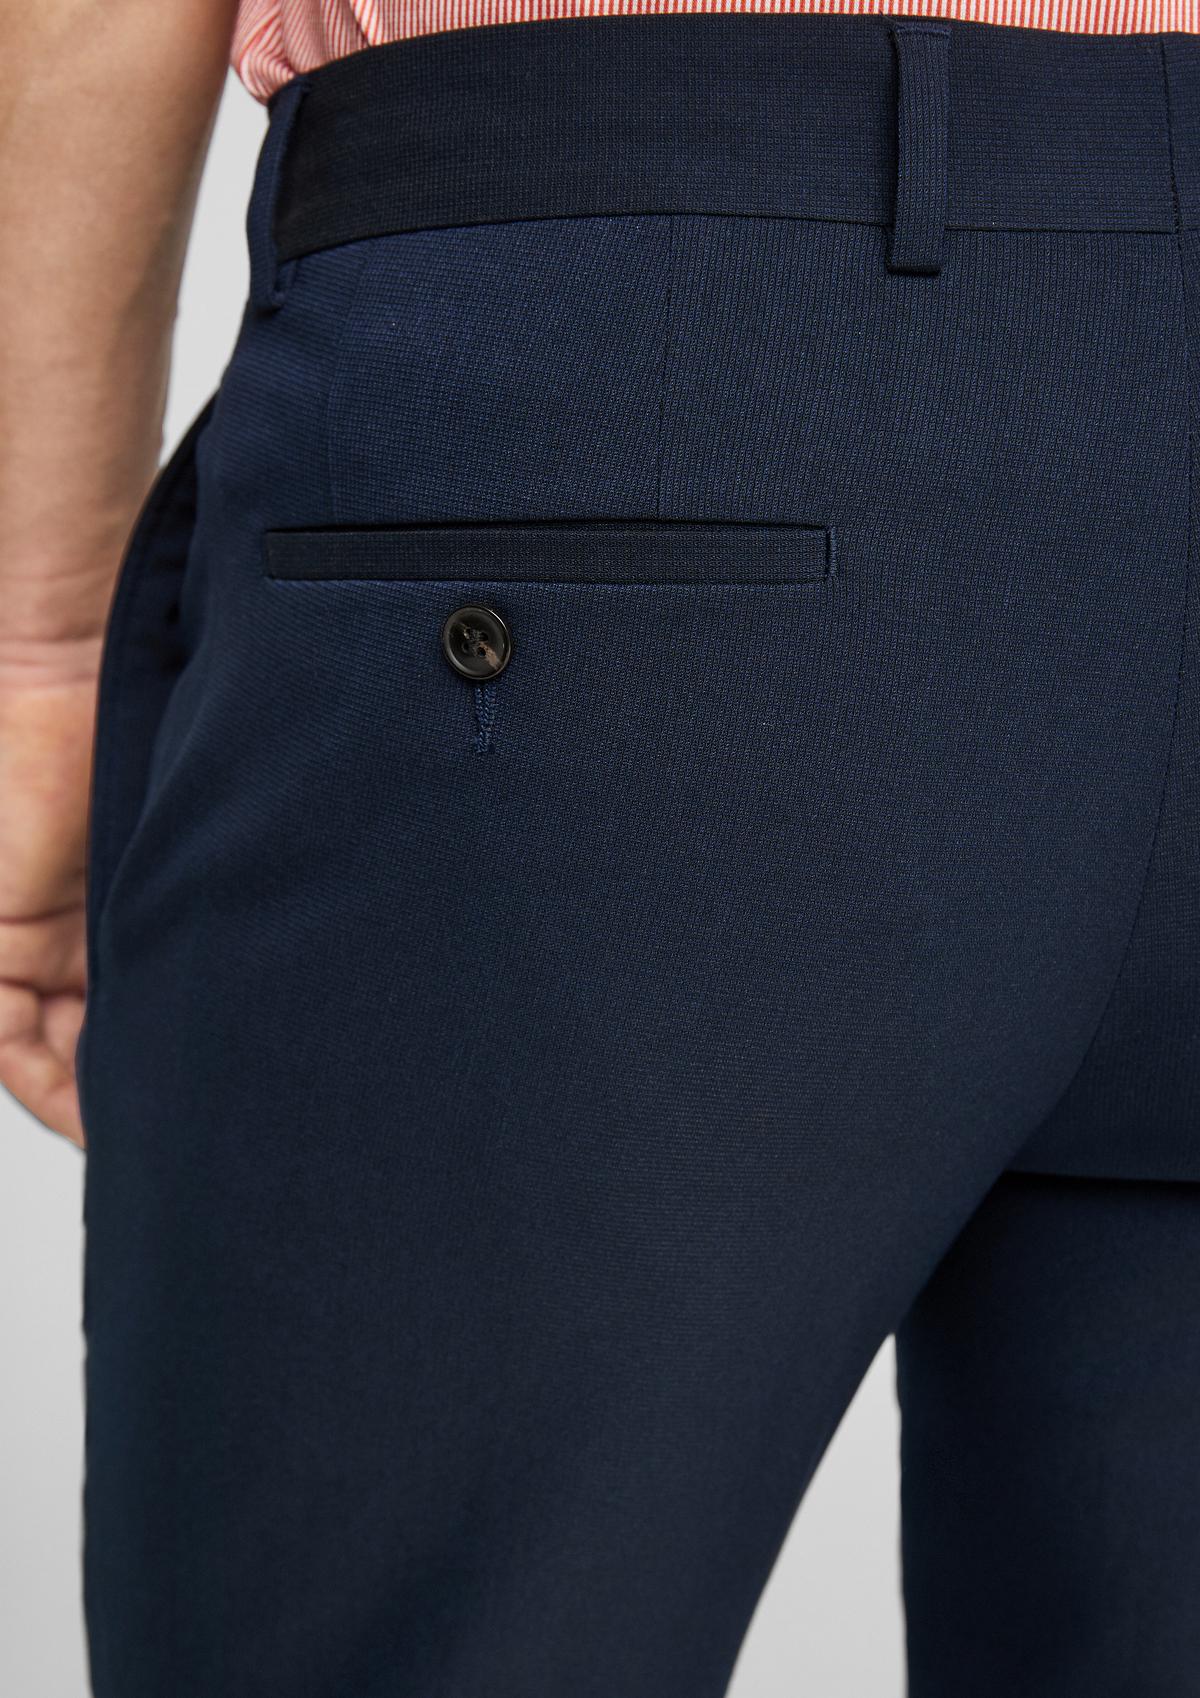 s.Oliver Slim Fit: Suit trousers with stretch for comfort